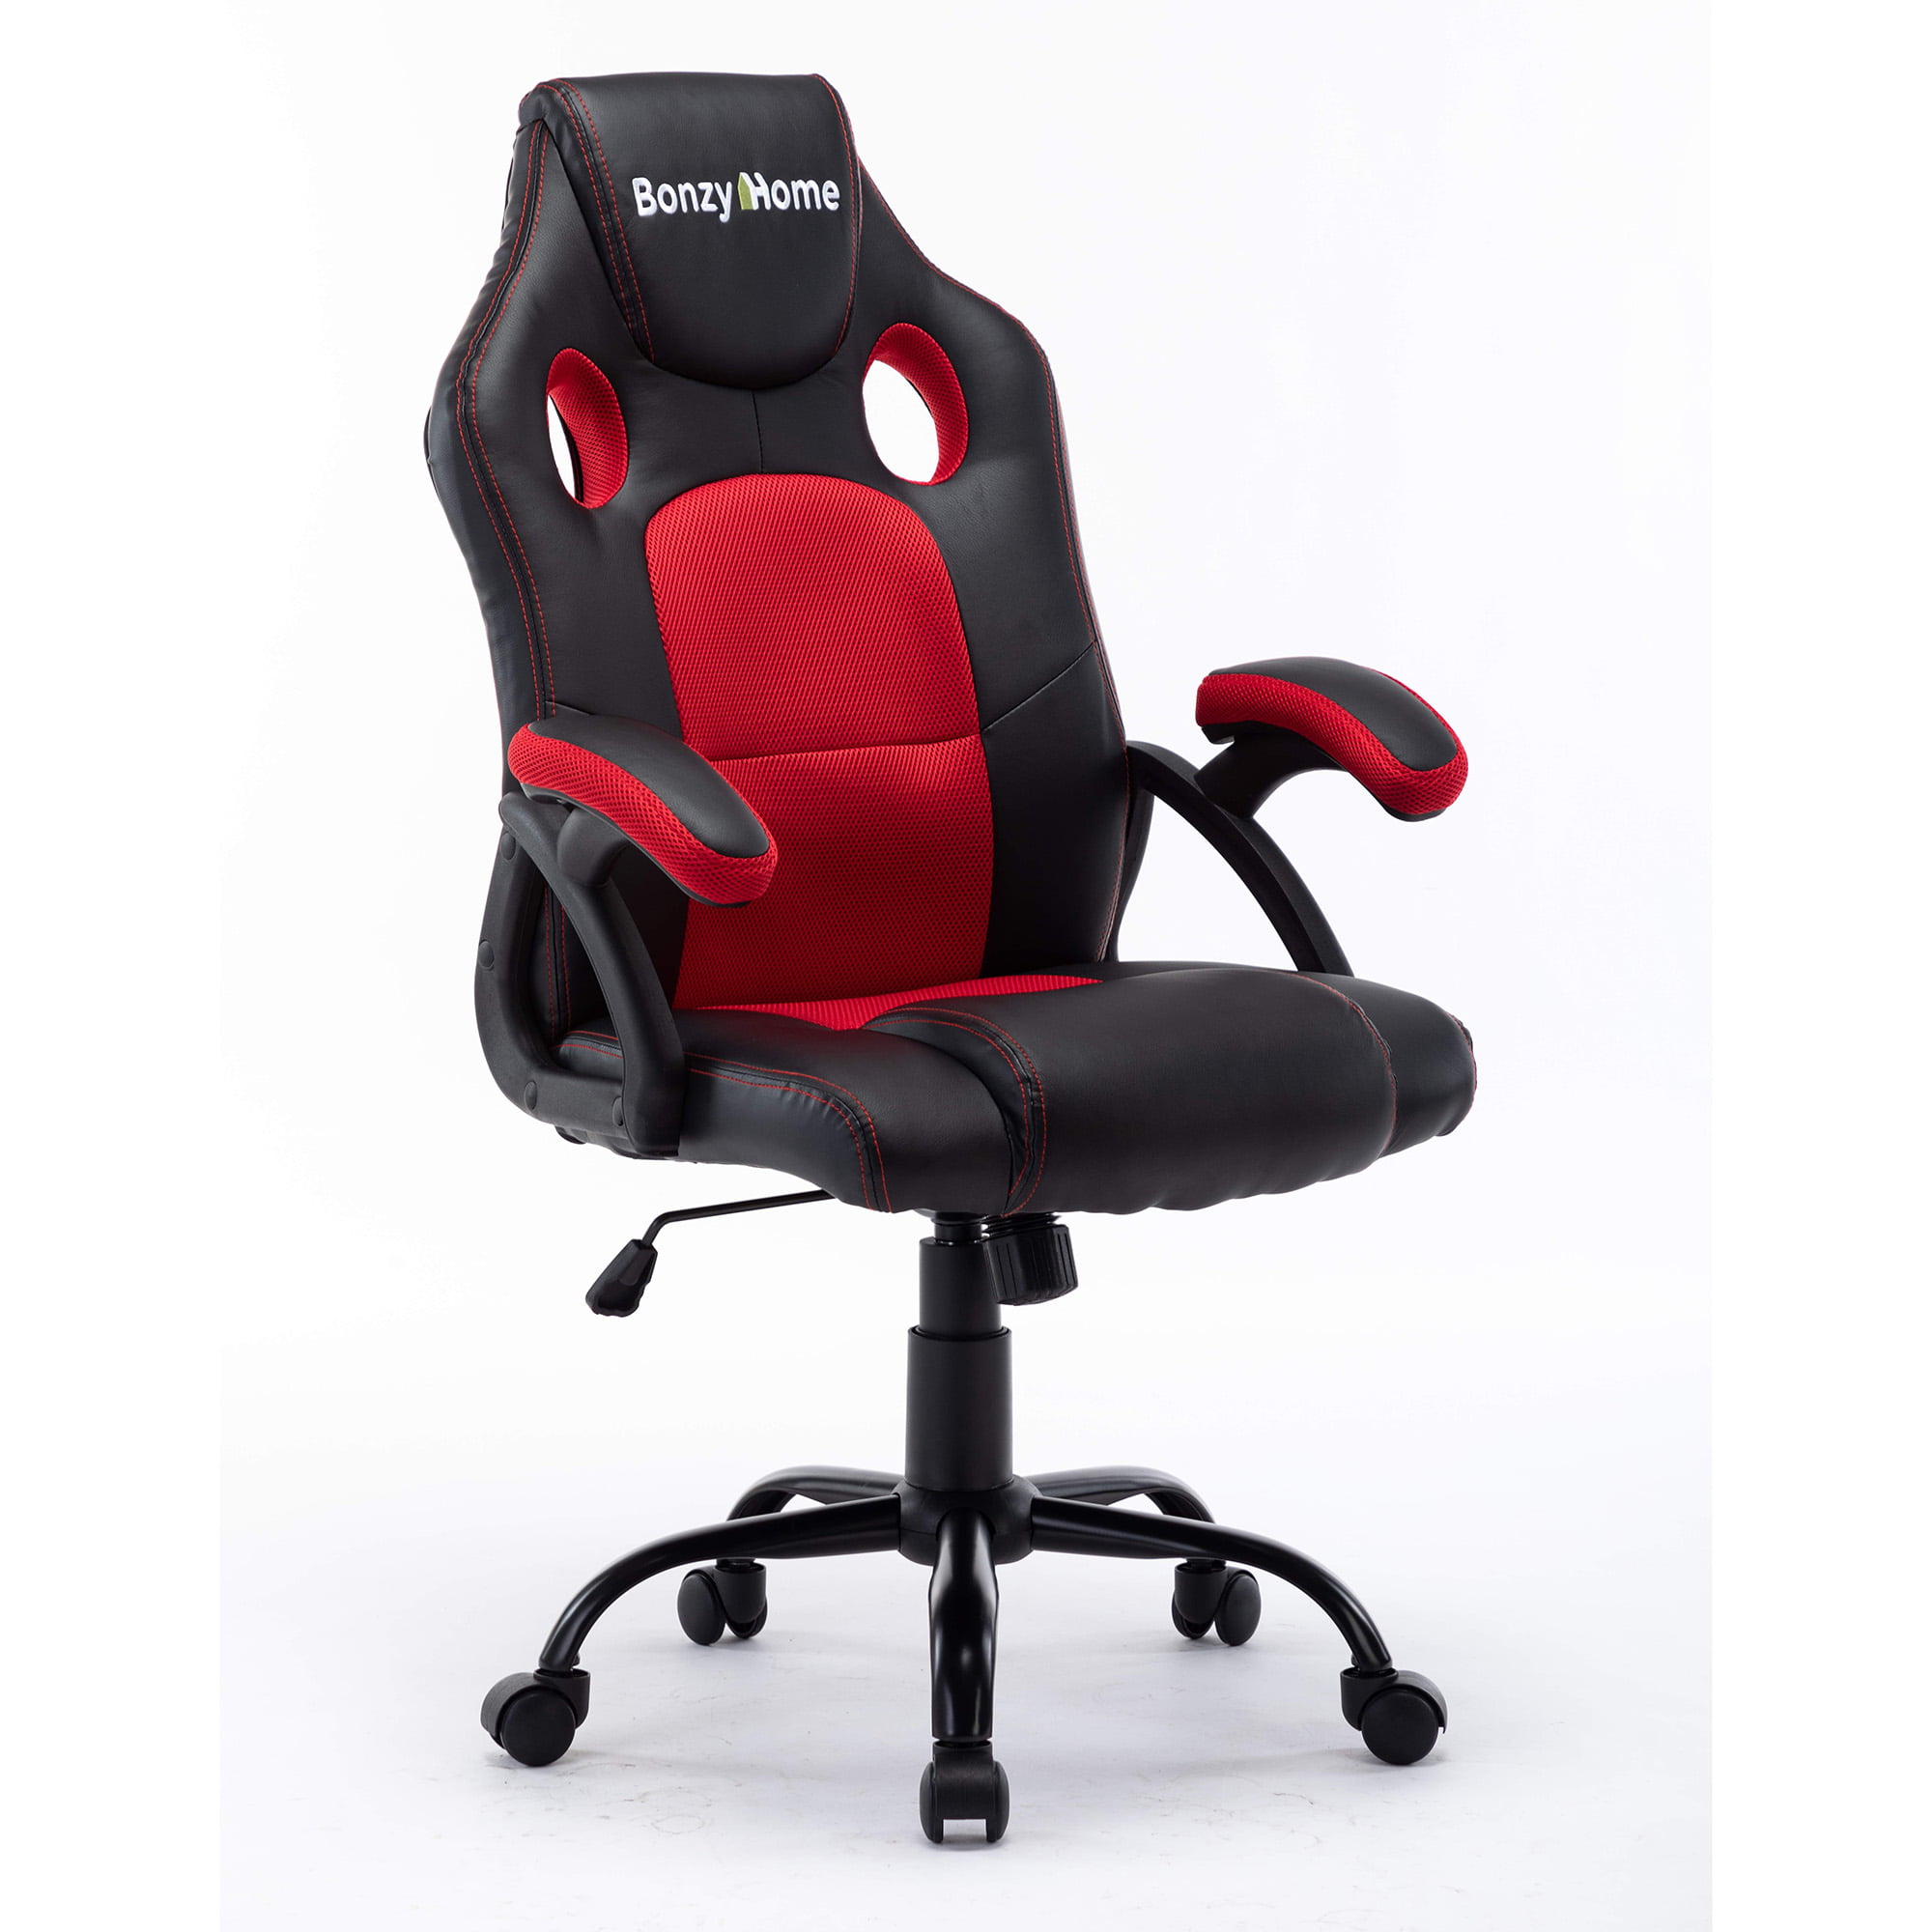 Pink Bonzy Home Gaming Chair Racing Style Office Swivel Computer Desk Chair Ergonomic Conference Chair Work Chair with Lumbar Support PU Leather